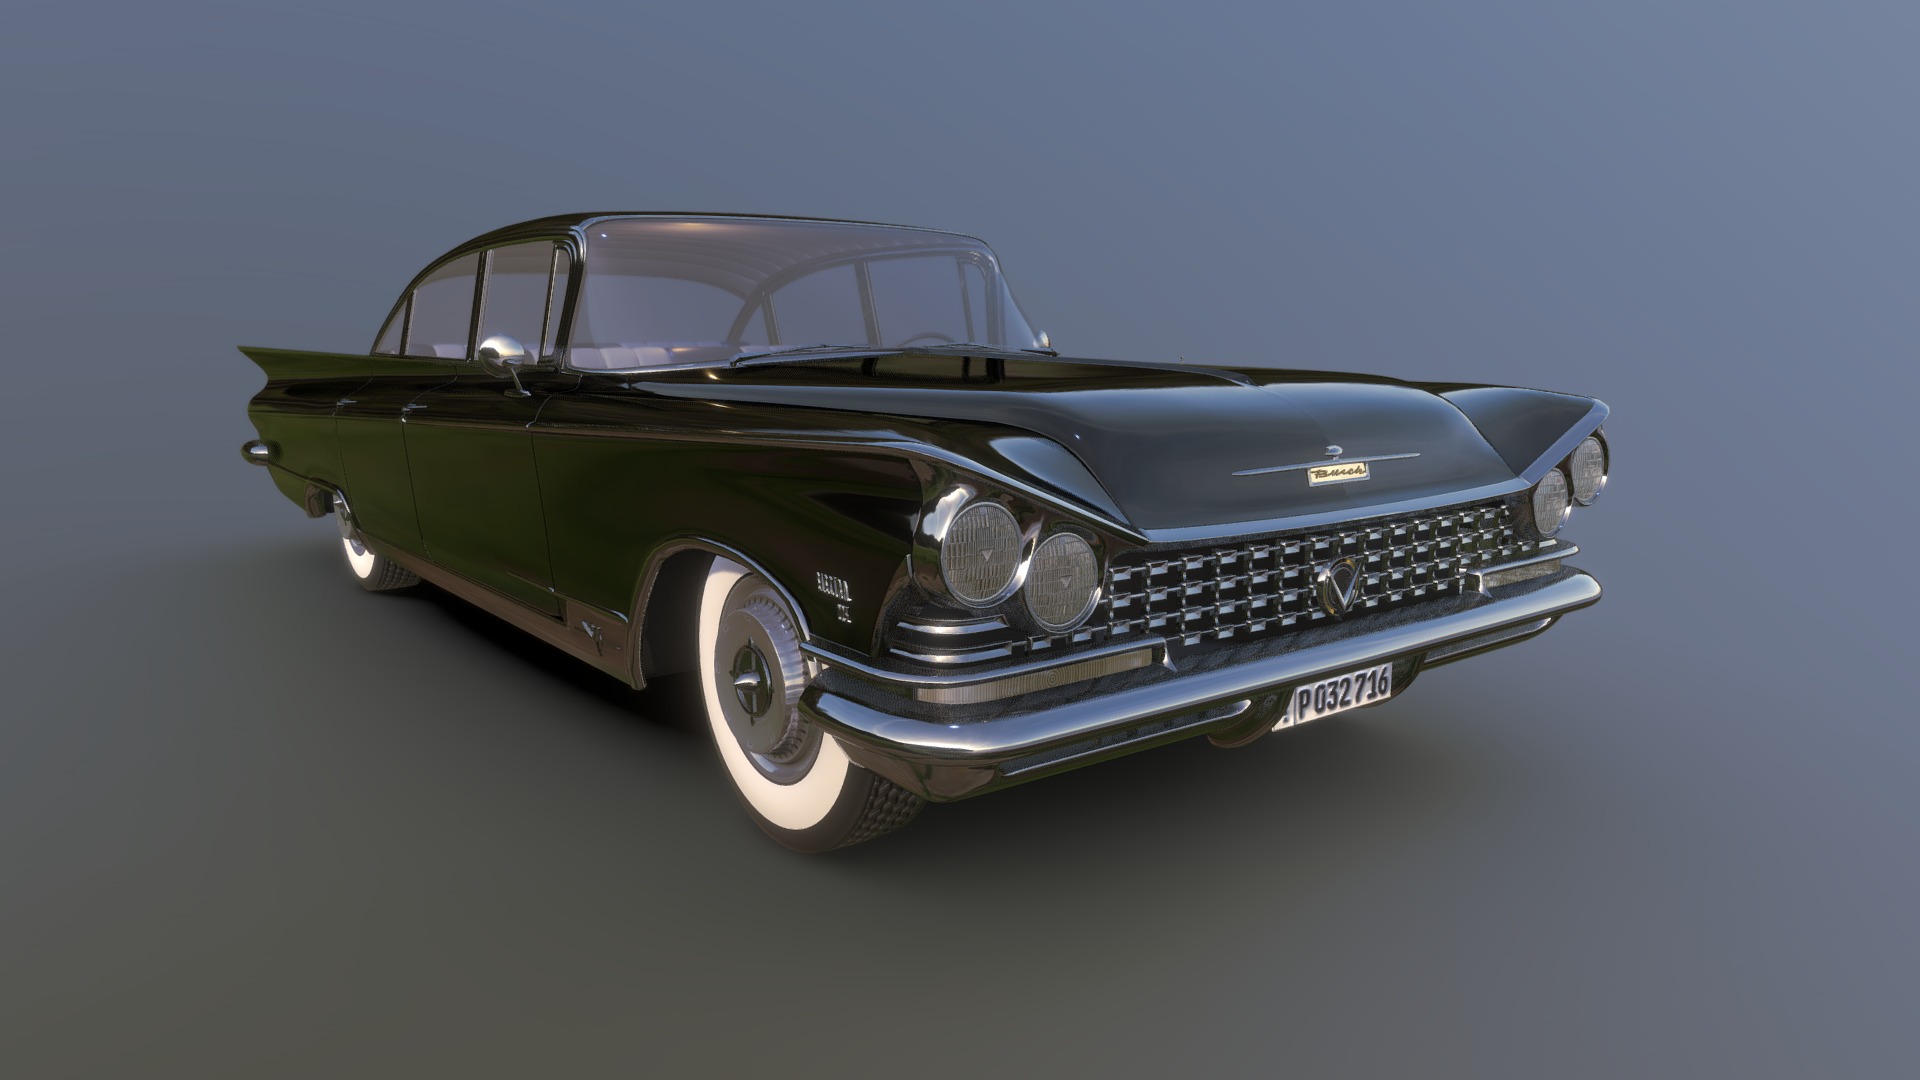 3D model Buick Electra 1959 - This is a 3D model of the Buick Electra 1959. The 3D model is about a black convertible car.